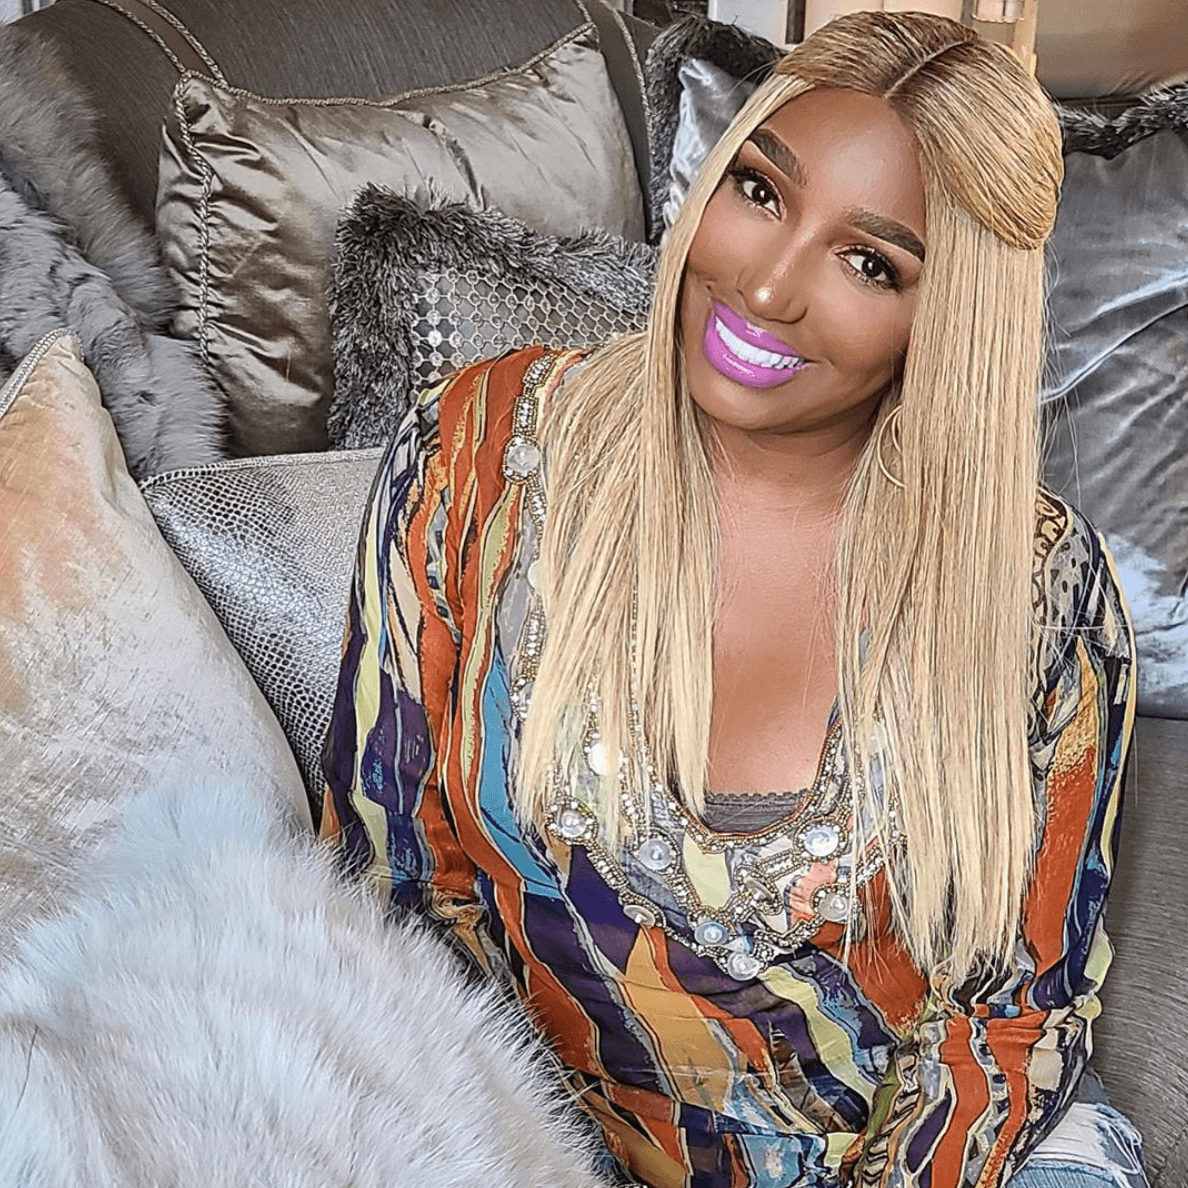 NeNe Leakes Goes OFF In Blistering Twitter Tirade Amid Contract Negotiations!